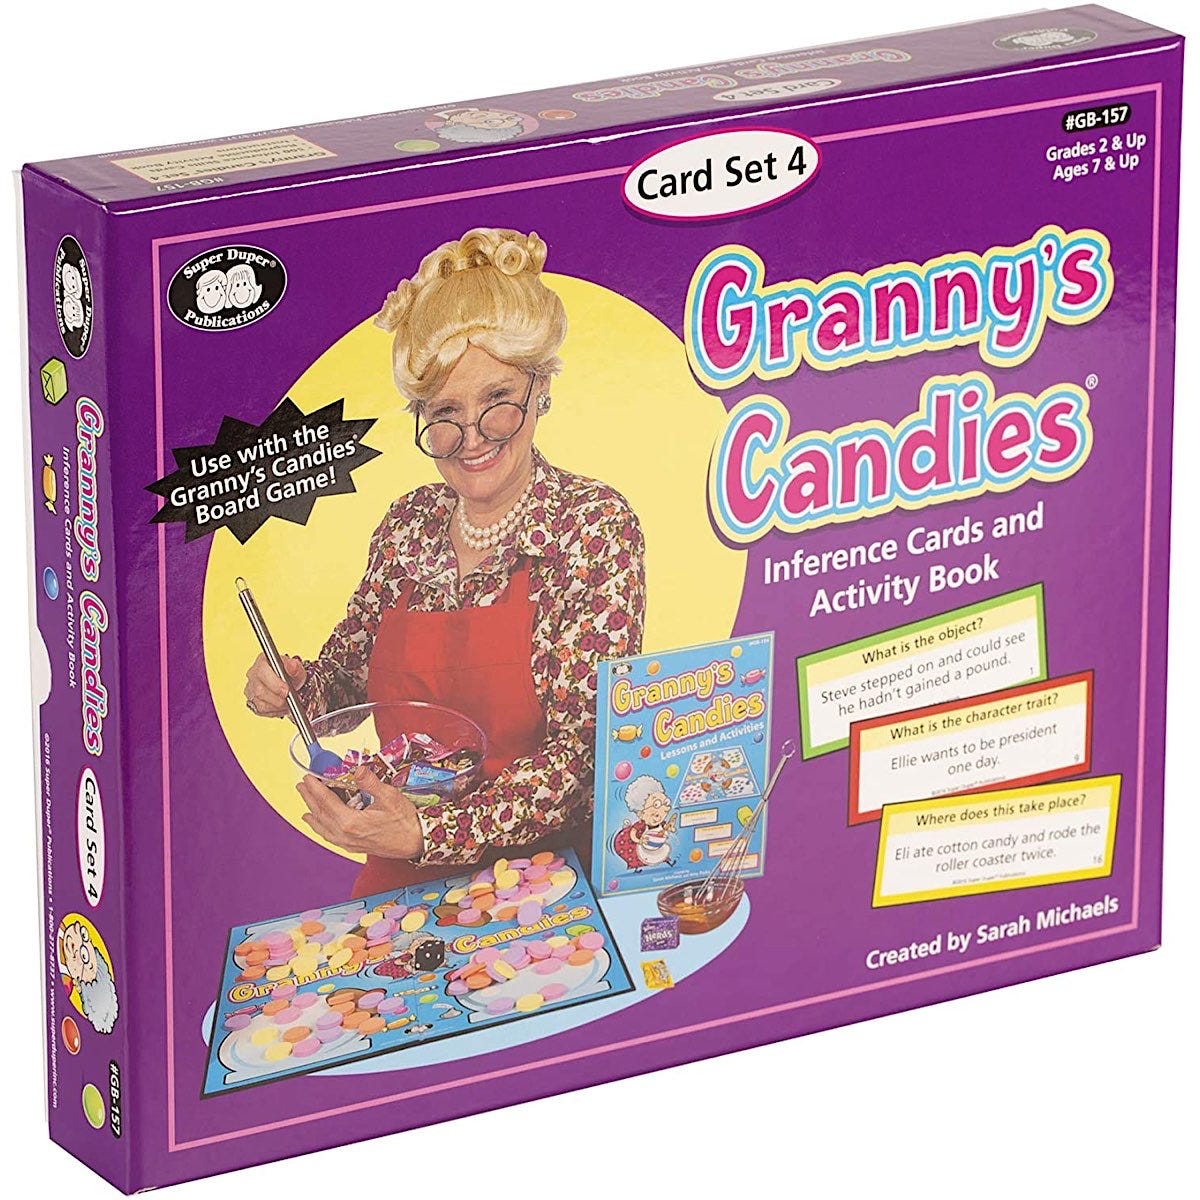 Granny's Candies Board Game Set 4 Inferences Add-On